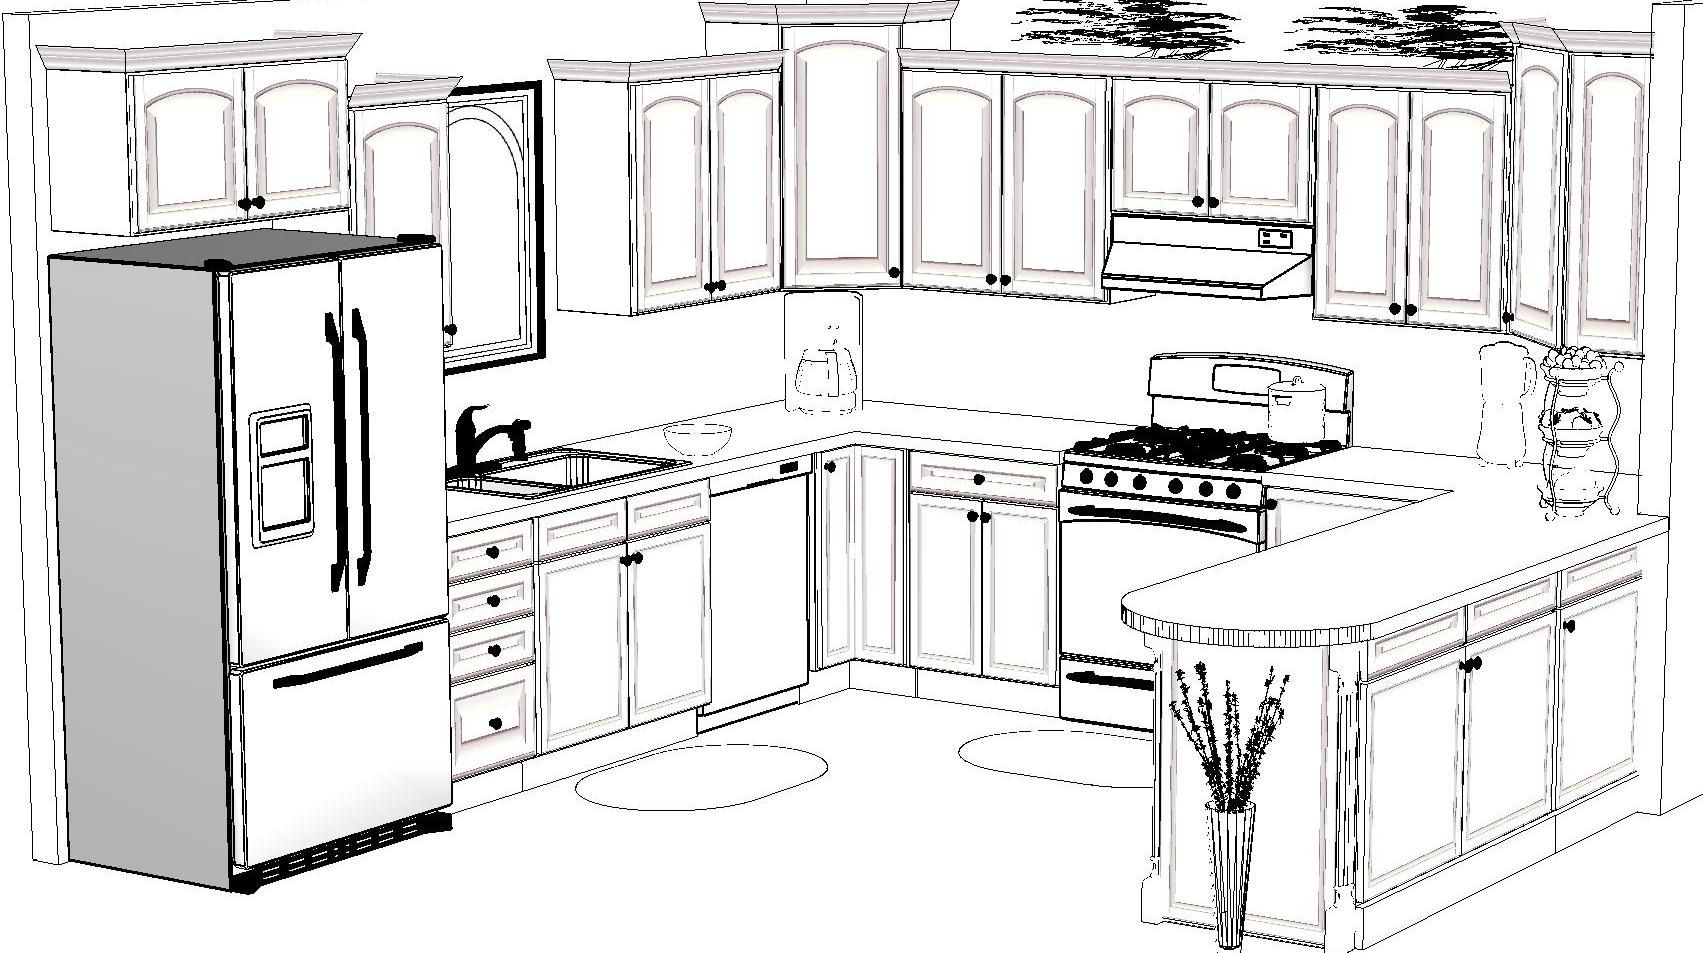 View Sketches Of Kitchen Designs Pictures | basnami